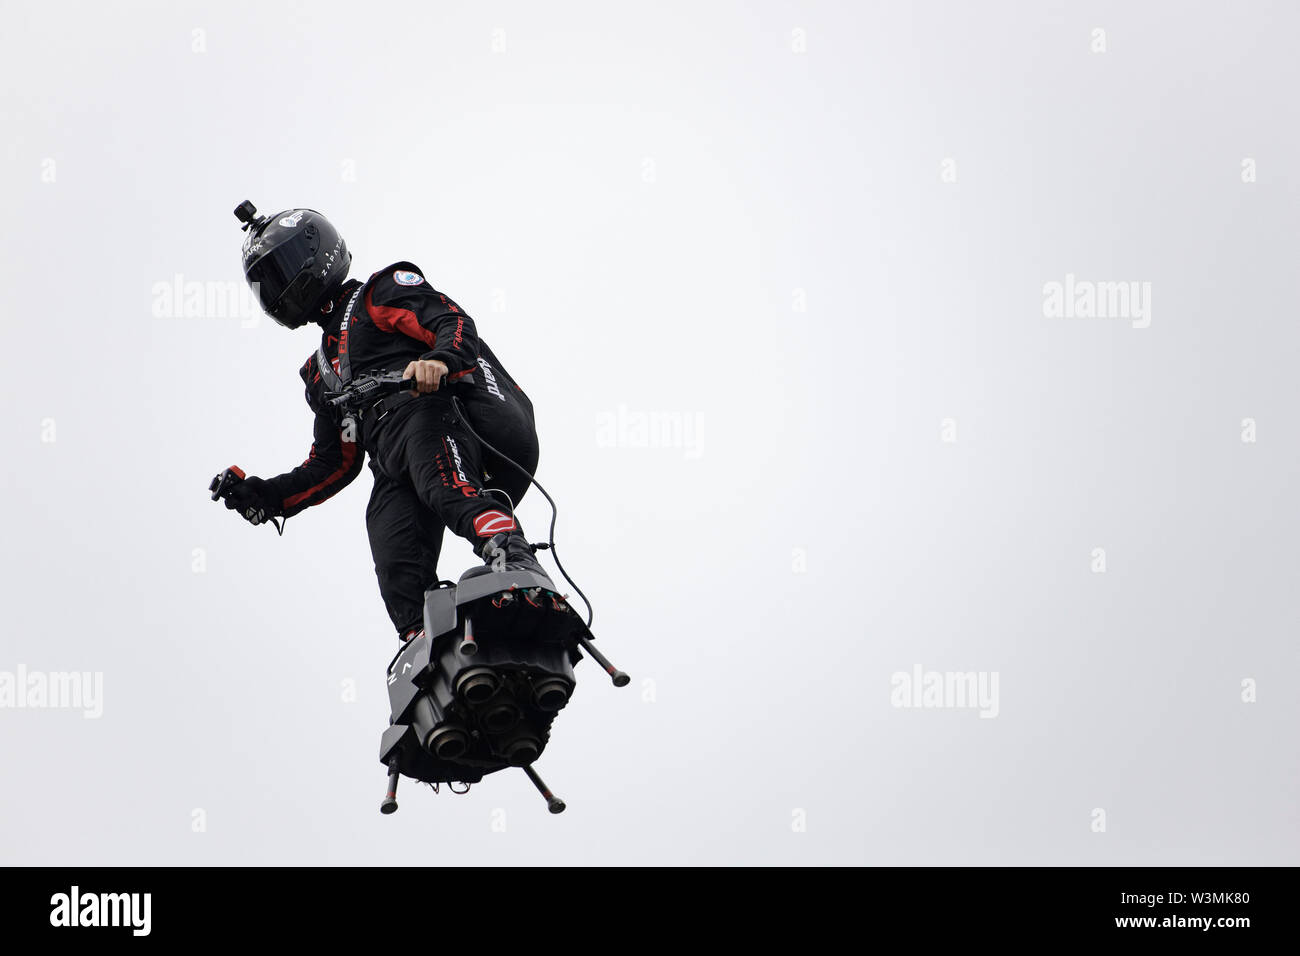 Paris, France. 14th July, 2019. Demonstration of the inventor Franky Zapata  on his Flyboard Air during the Bastille day military parade Stock Photo -  Alamy